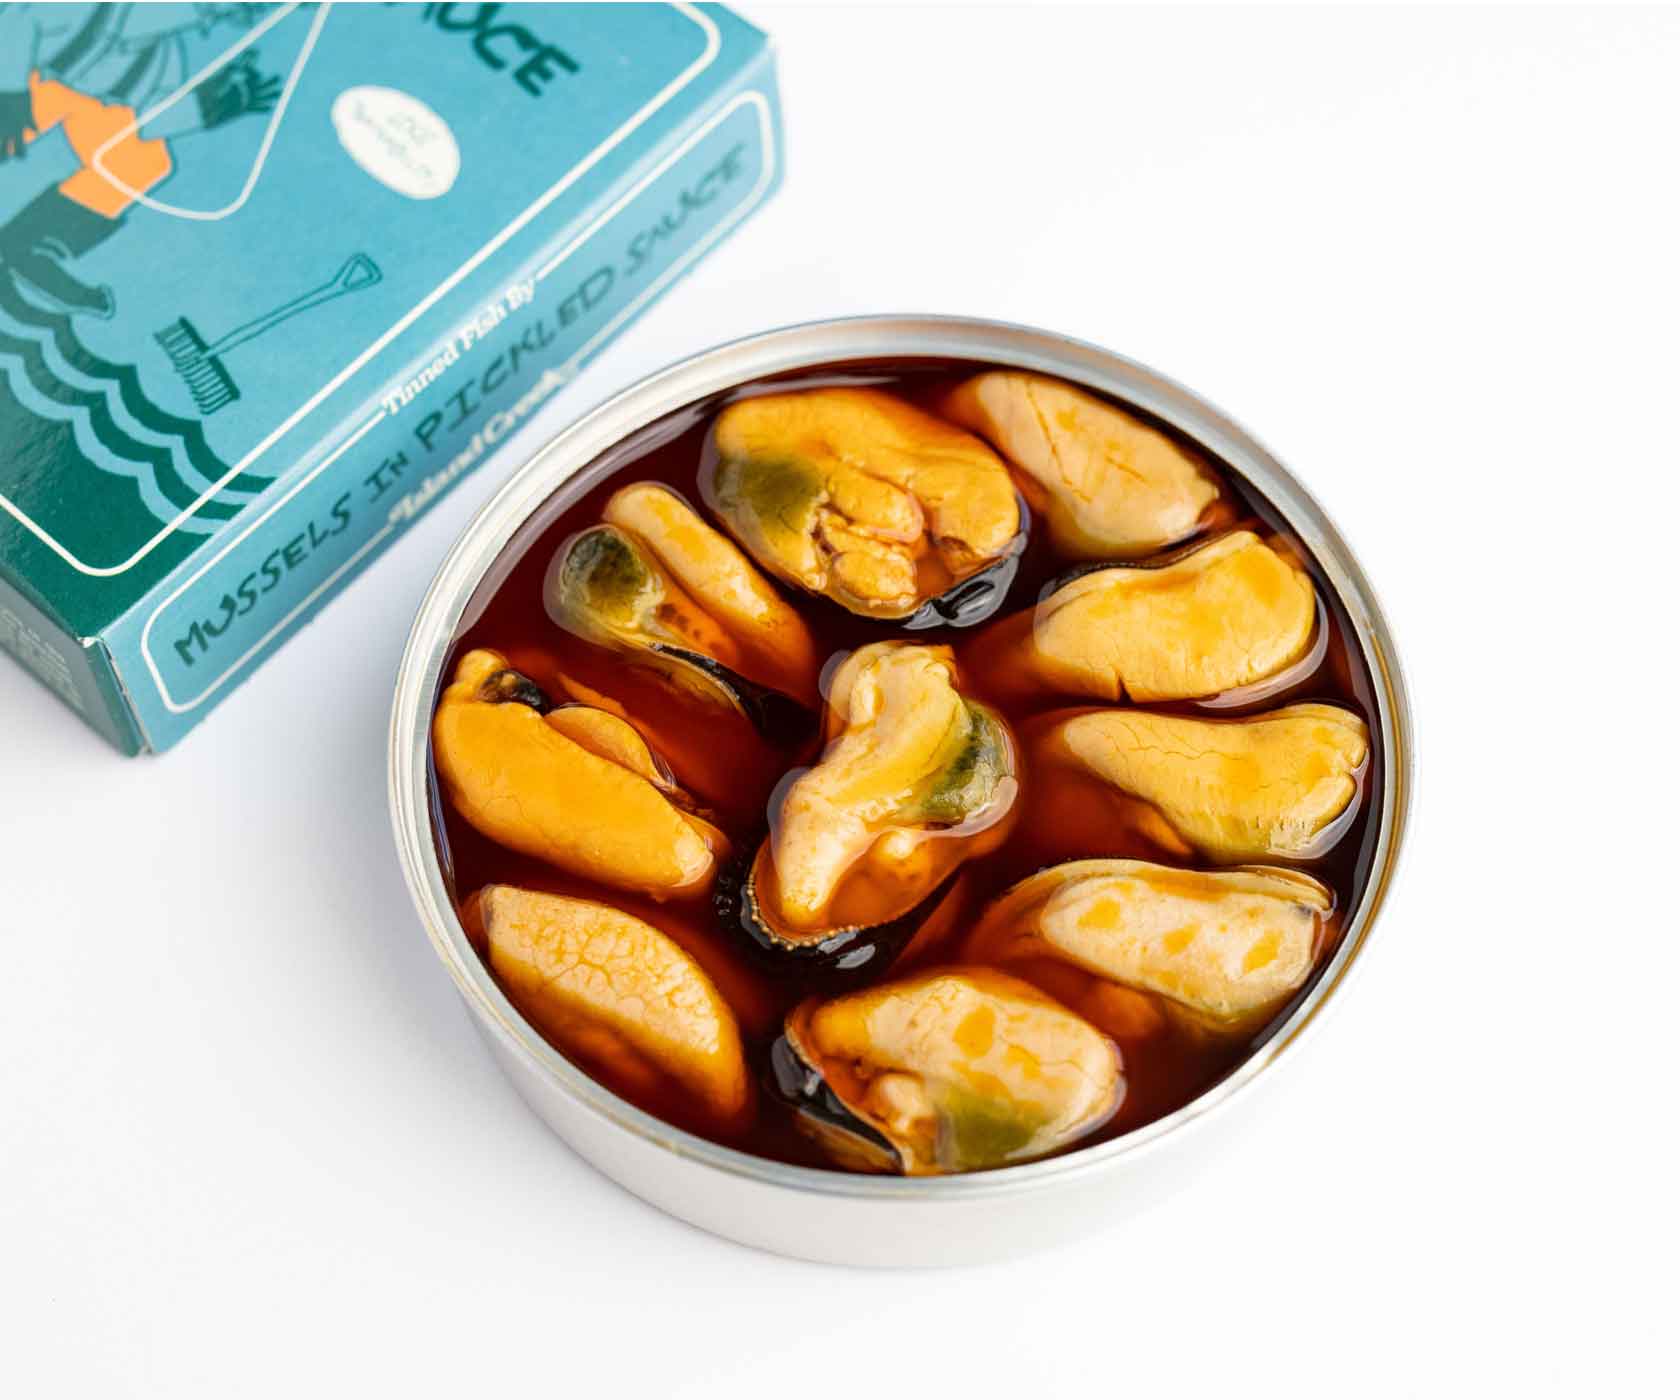 Island Creek x Mariscadora Mussels in Pickled Sauce *BUY 4 PACK & SAVE 20%*